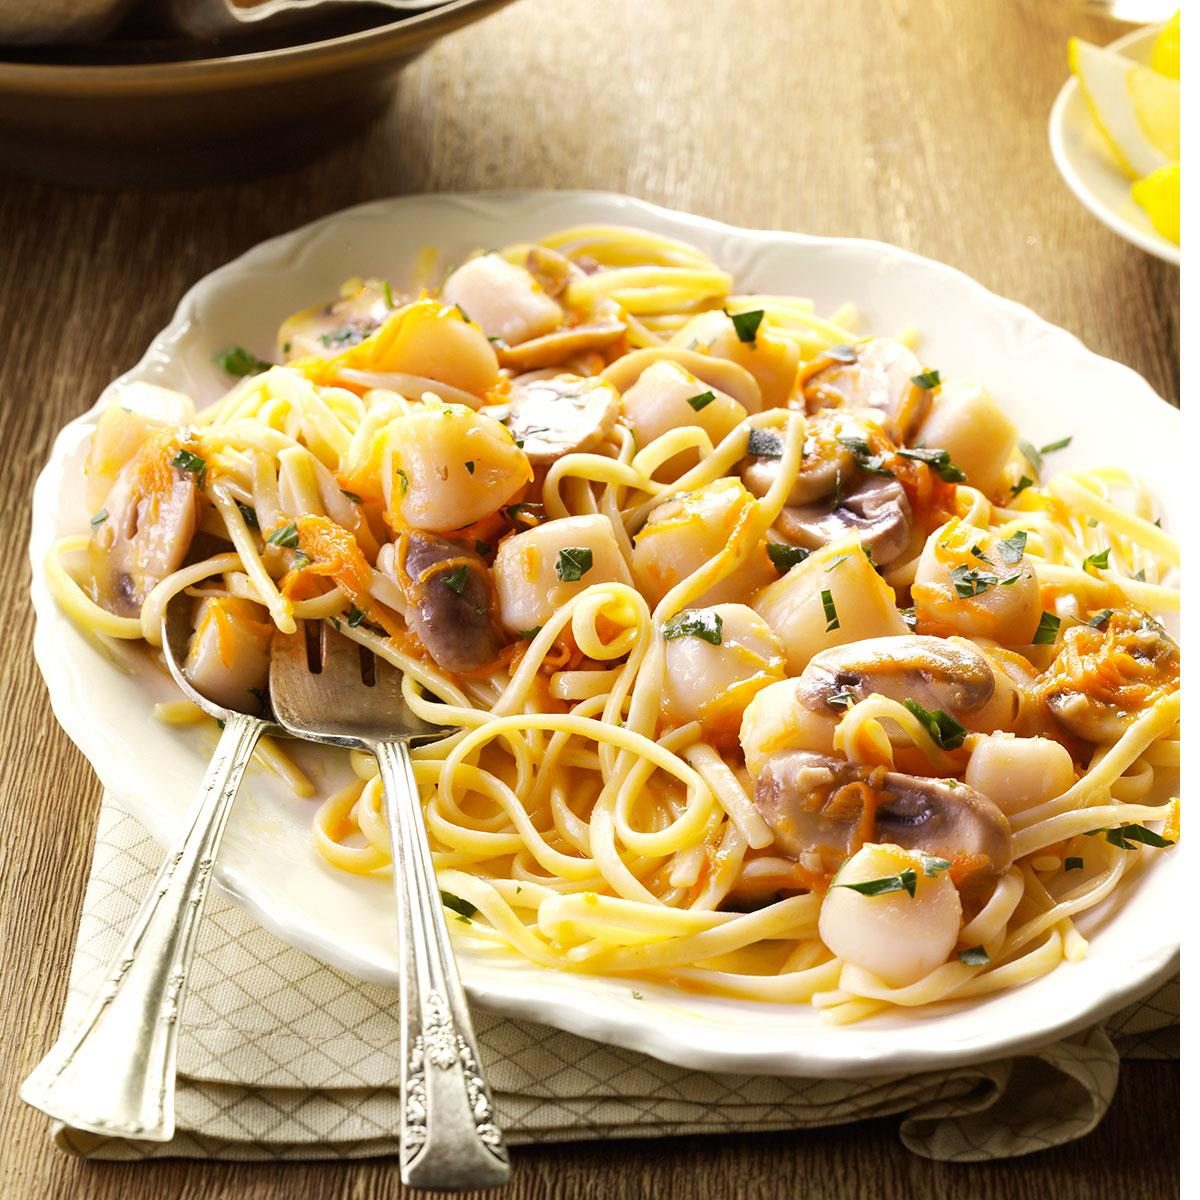 Day 17: Scallops with Linguine